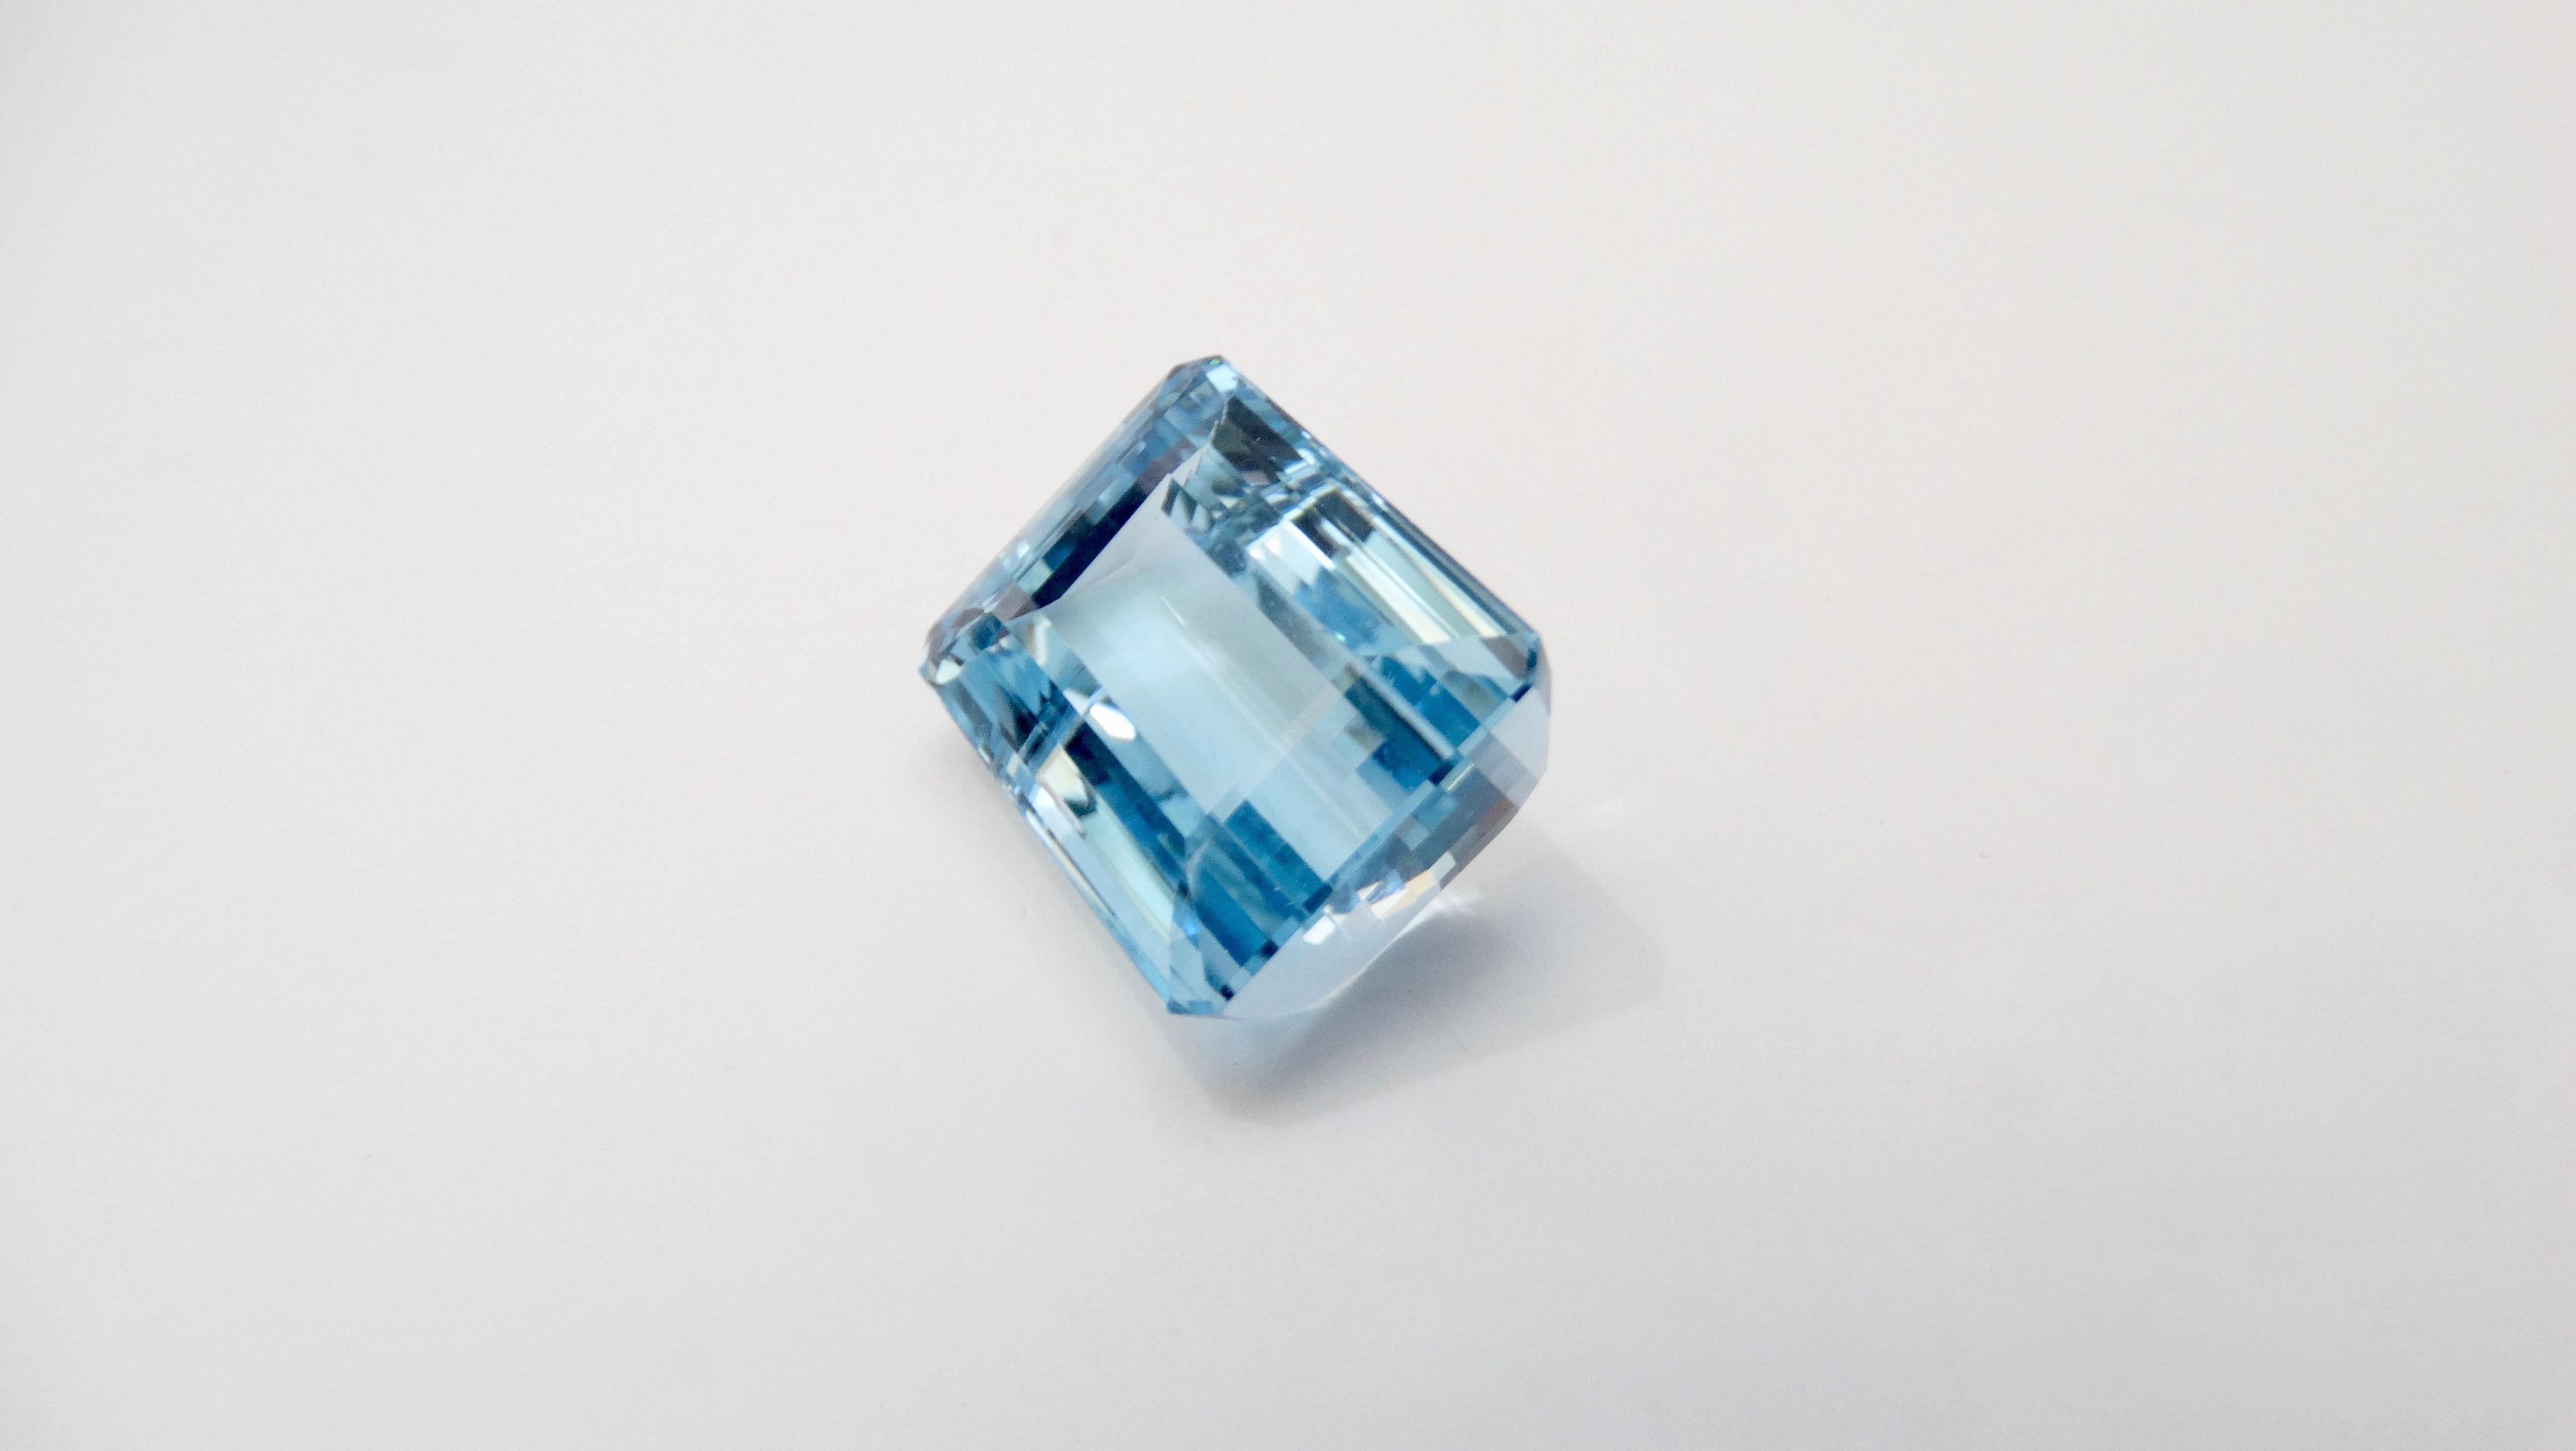 Create the jewelry piece of your dreams with this gorgeous 46.9 Carat blue Topaz octagon step cut gemstone. Weight in grams is 9.37. Measures 22 x 17.5 x 13.9 mm. 